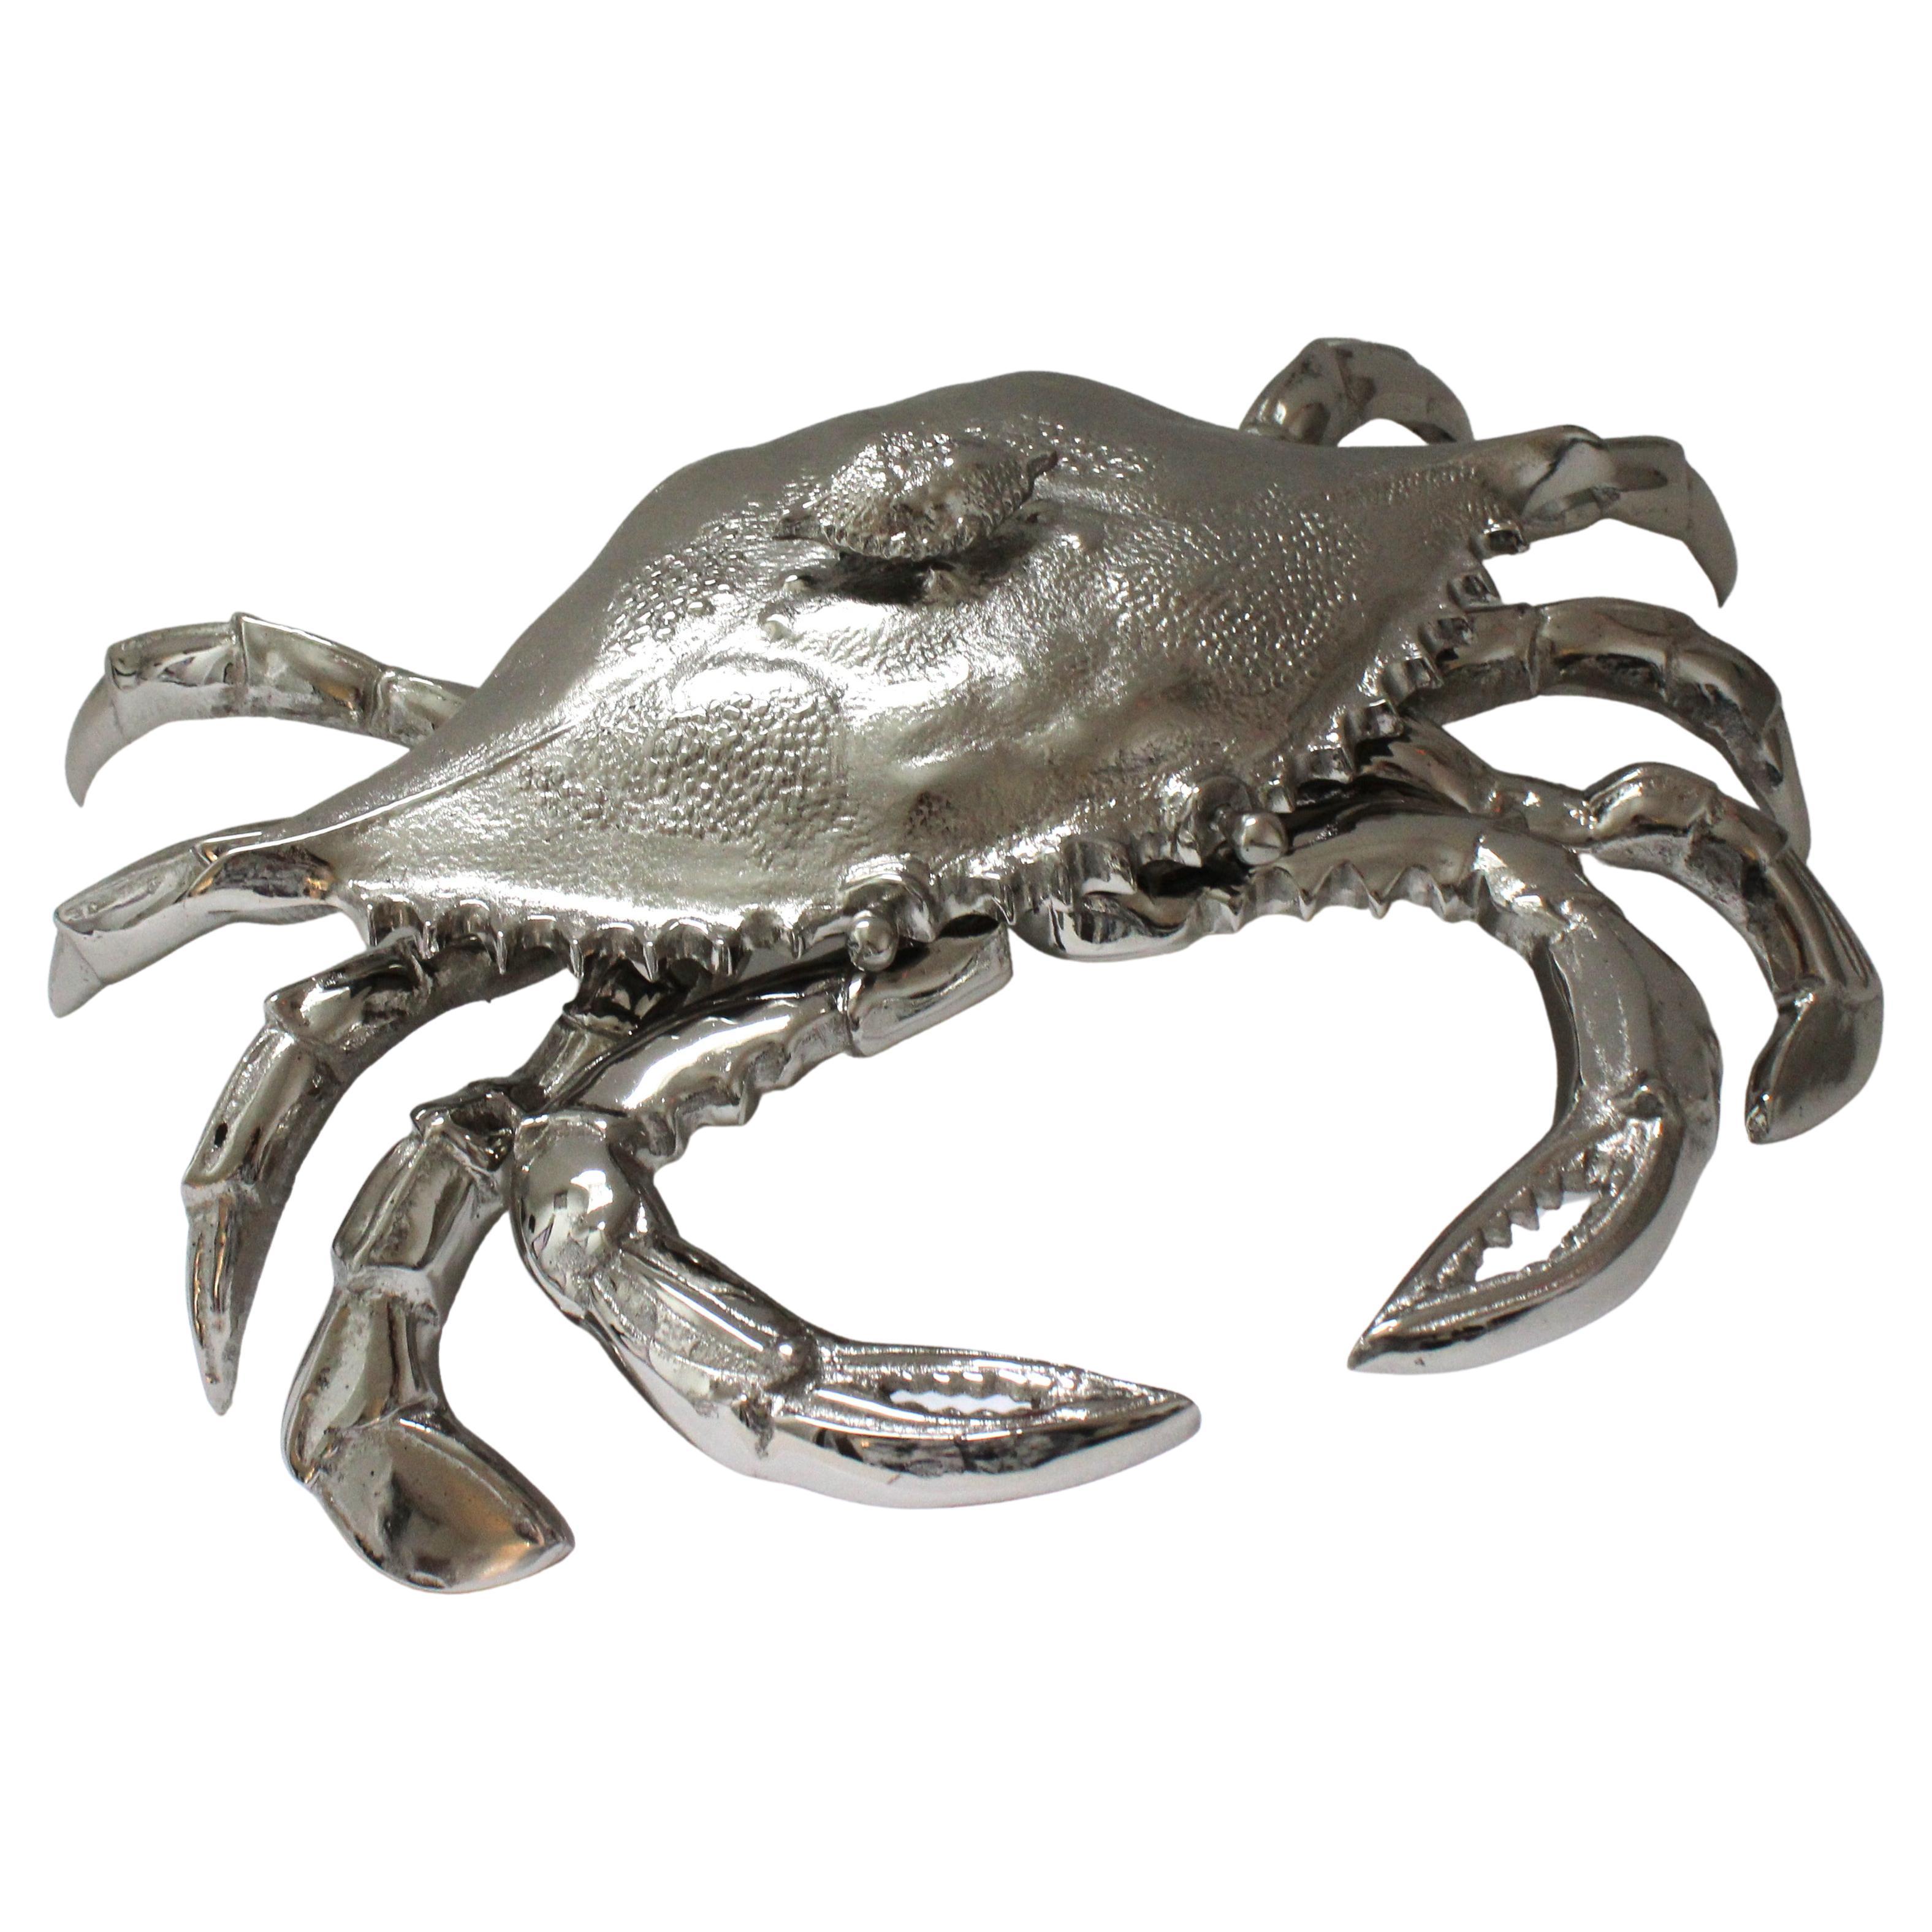 This stylish and chic nickel plated crab-form dish will make a statement with its large scale and use of materials. The piece is created by Angel & Zevallos, a workroom located in the Palm Beaches. 